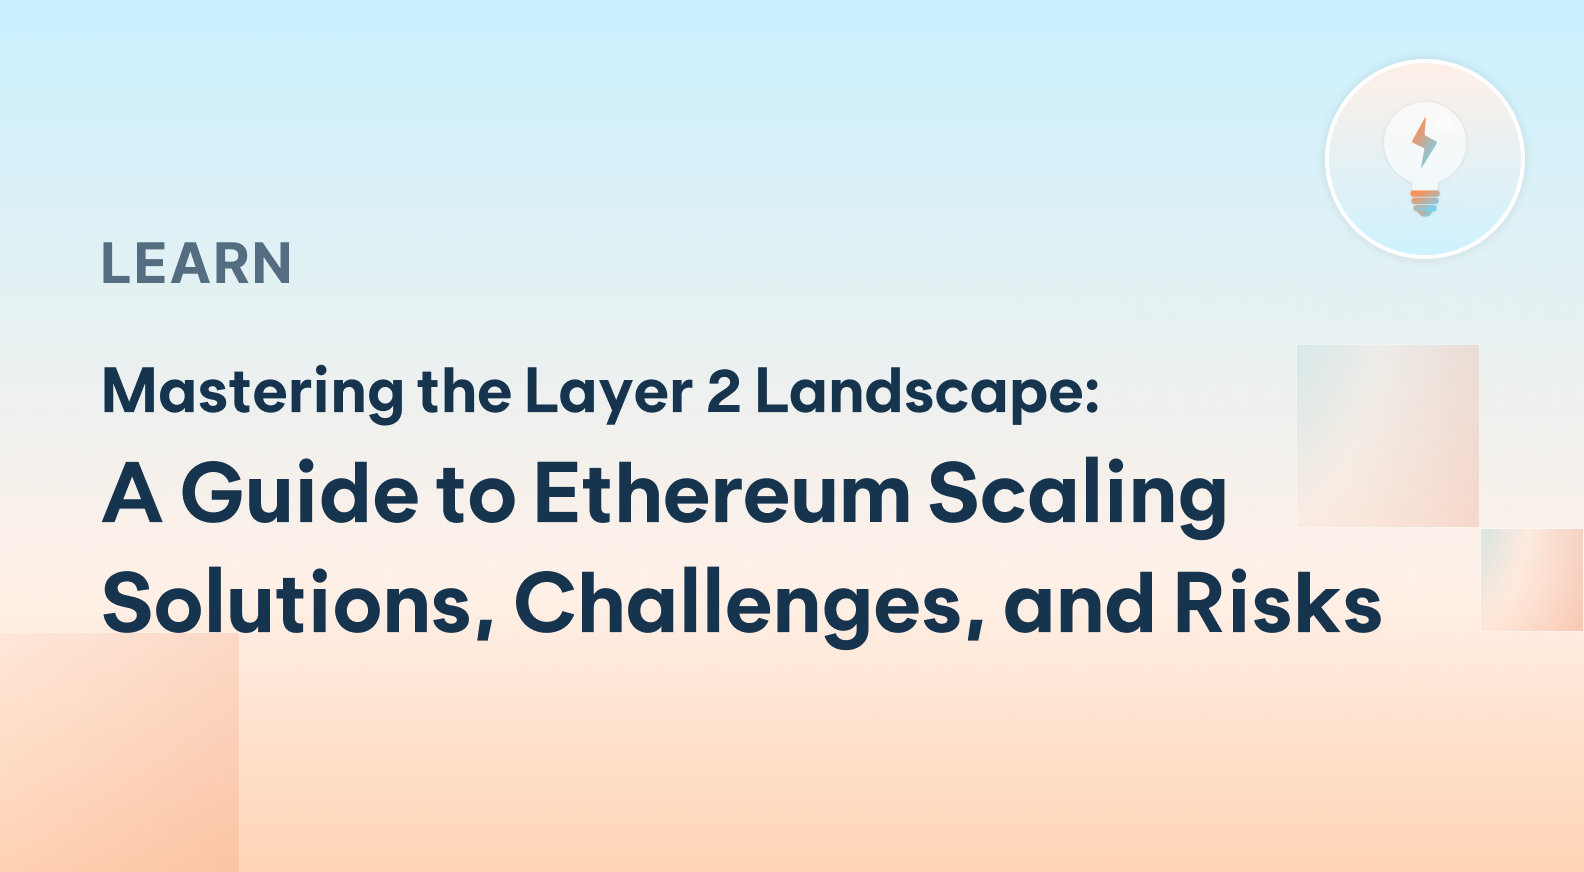 Mastering the Layer 2 Landscape: A Guide to Ethereum Scaling Solutions, Challenges, and Risks